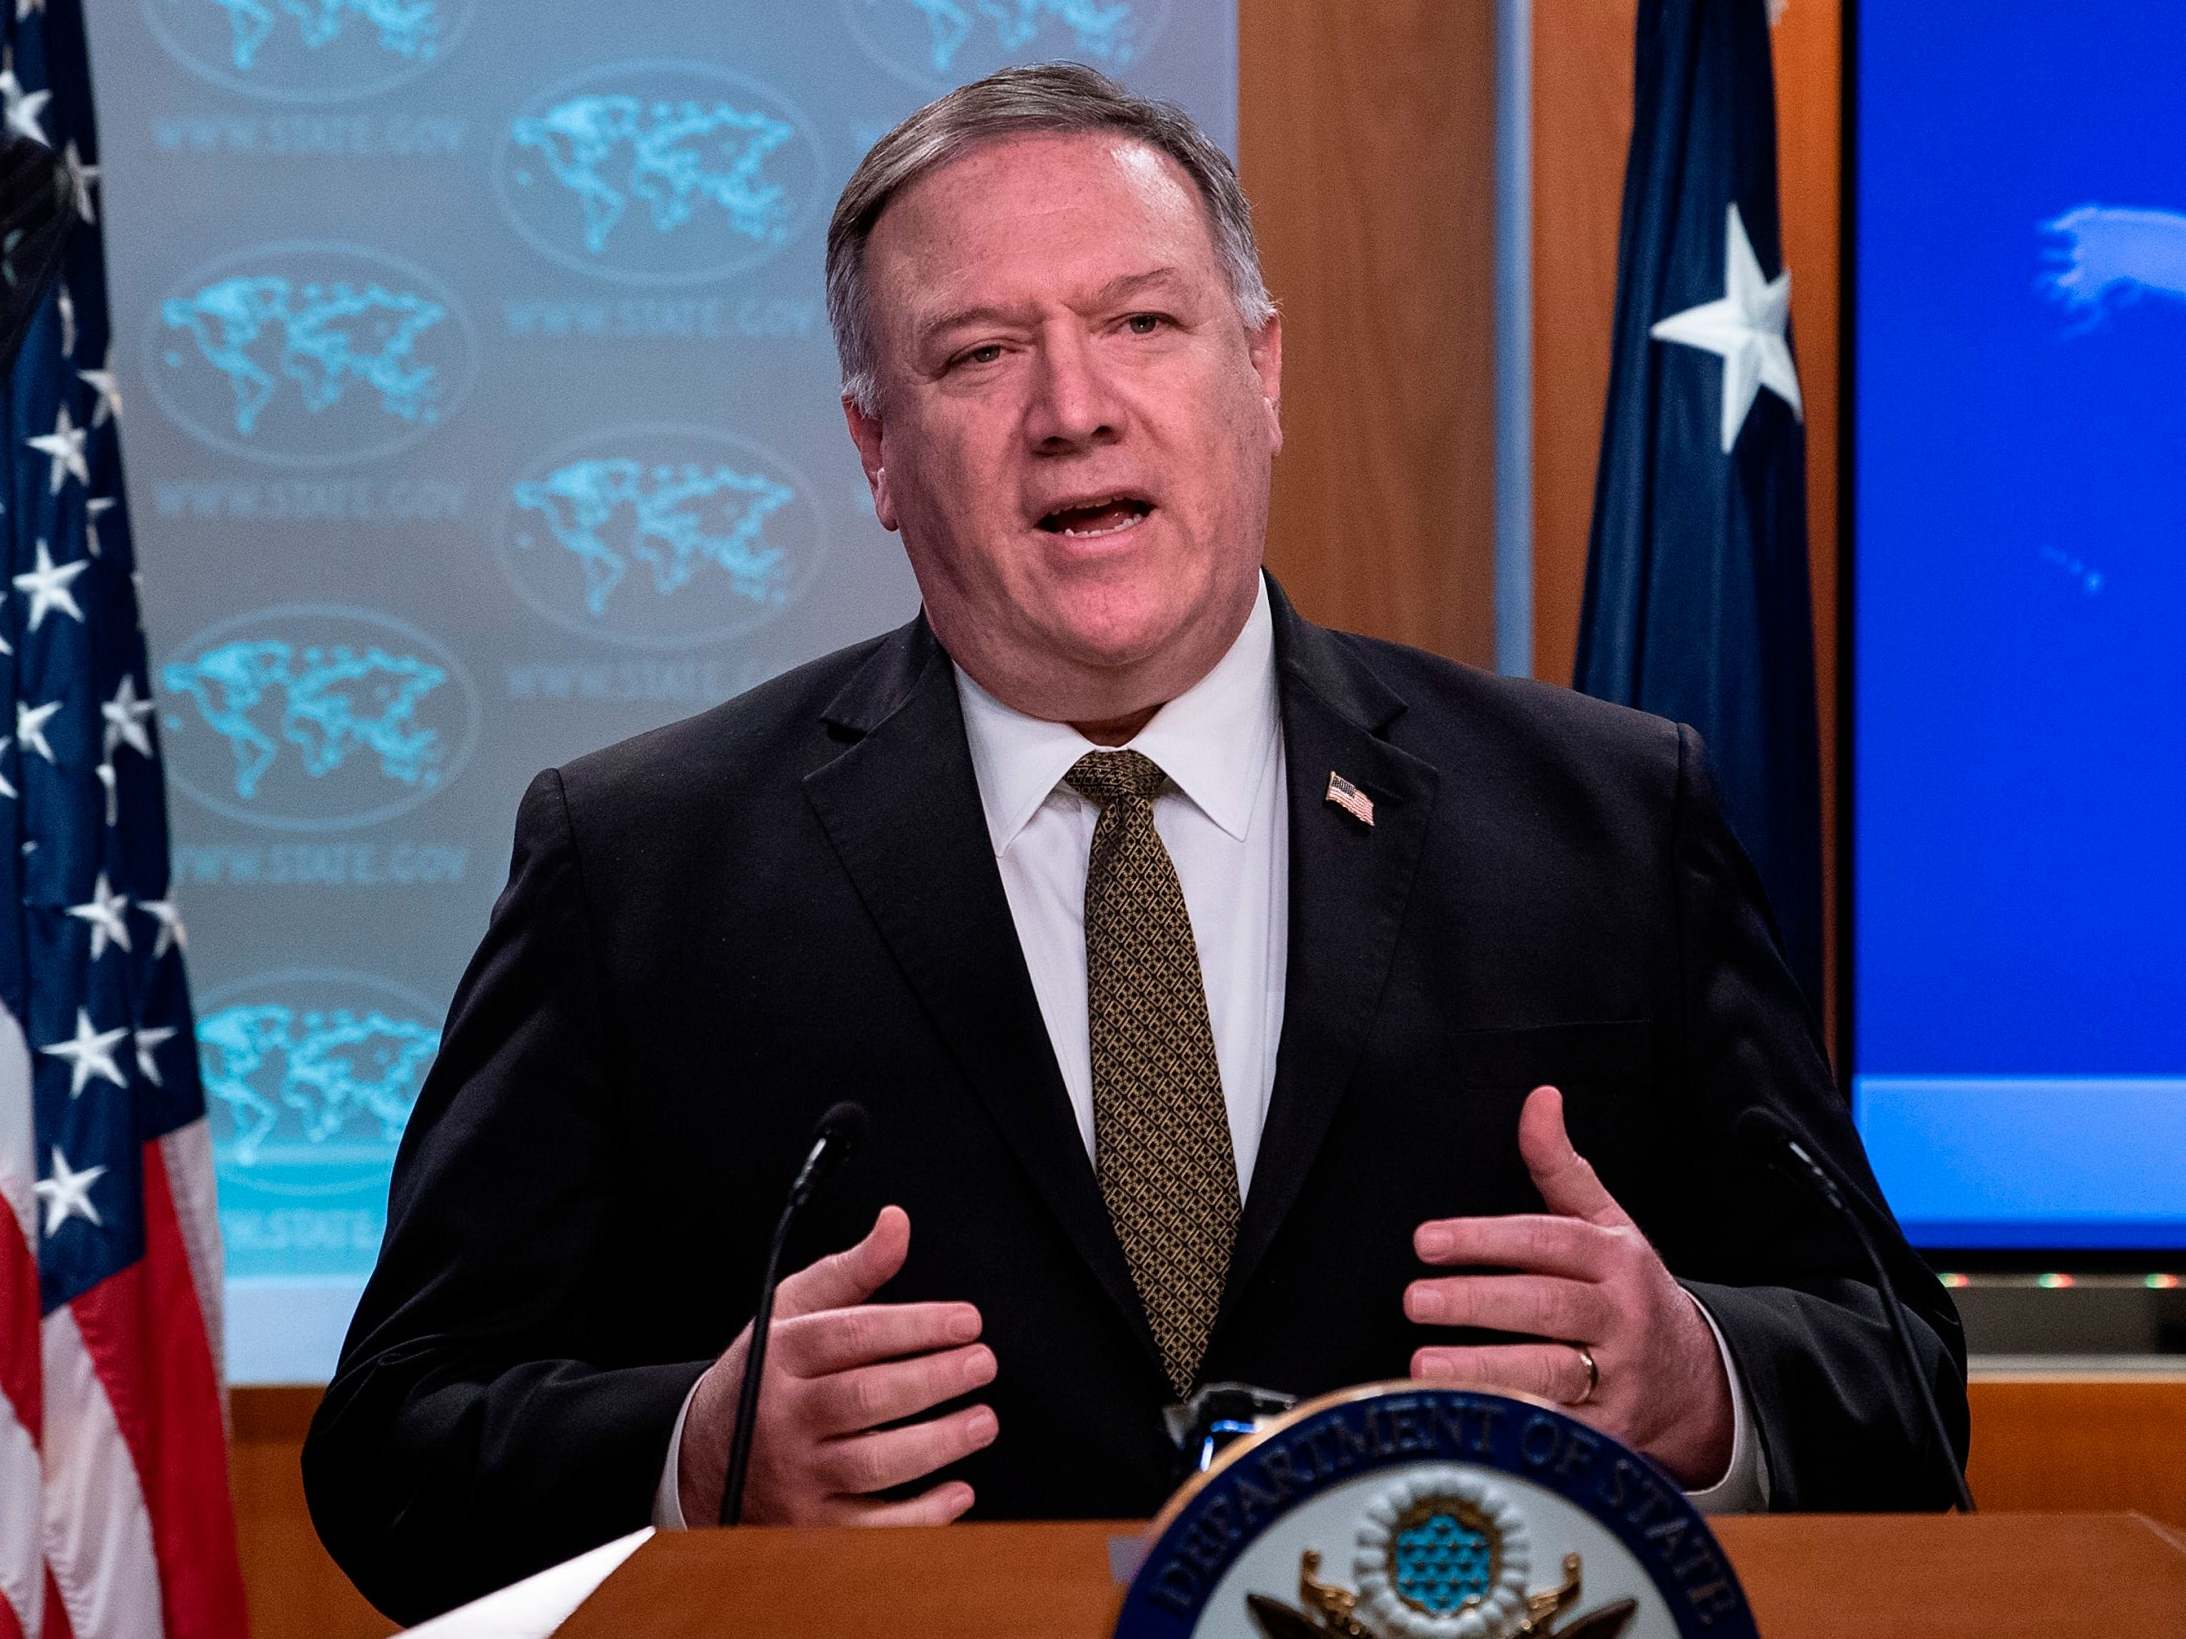 "China has a history of infecting the world," Mr Pompeo said during an interview on Sunday